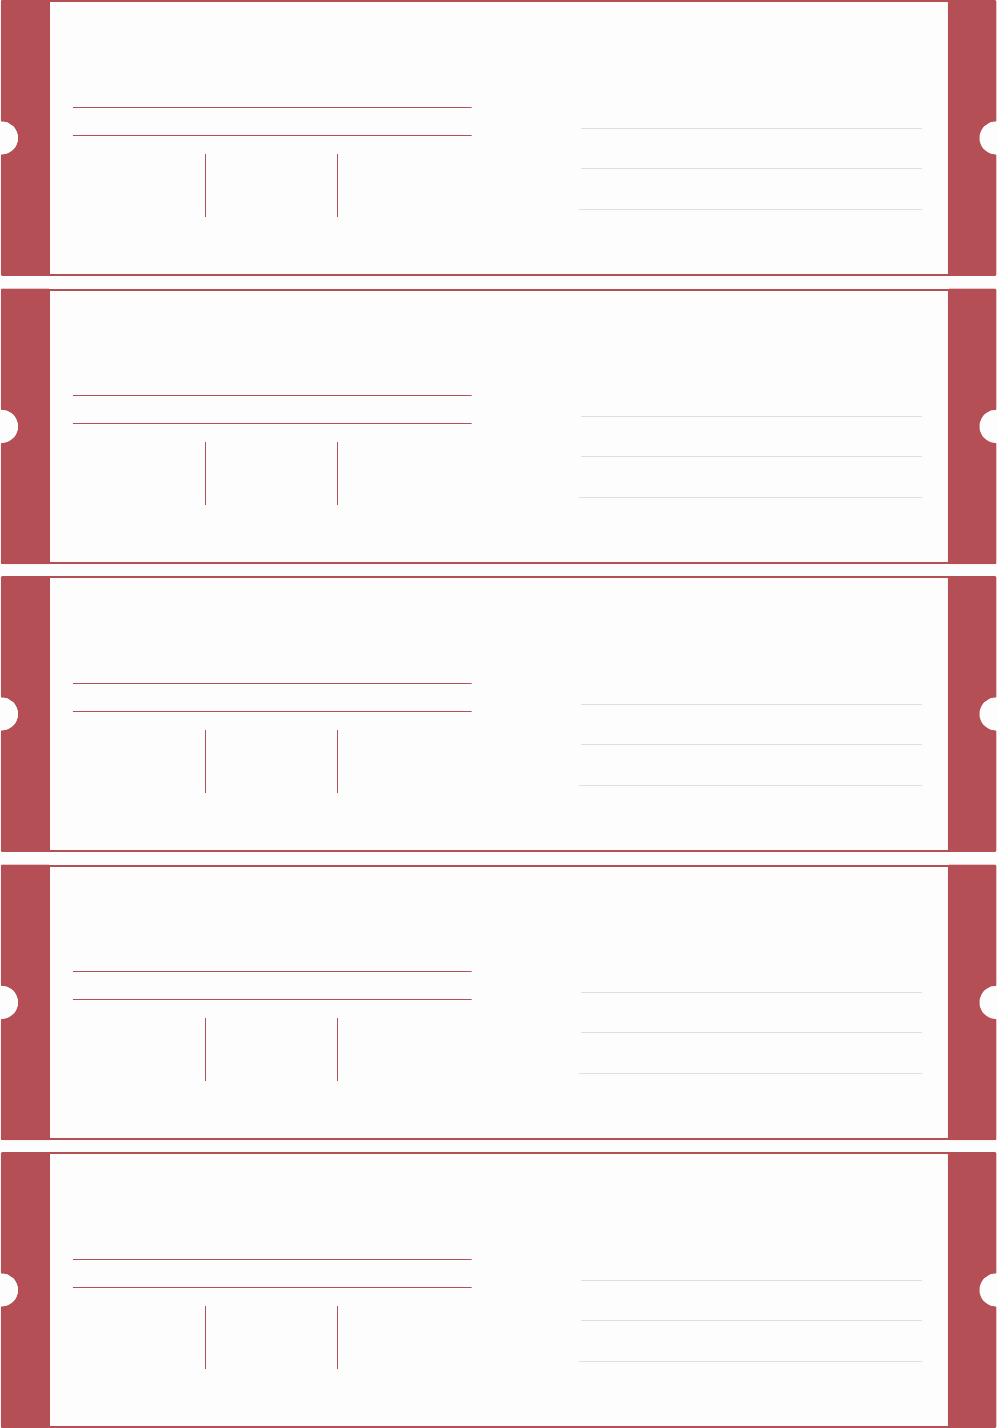 Raffle Tickets Template Word Awesome Download Download Raffle Ticket Template Word format for